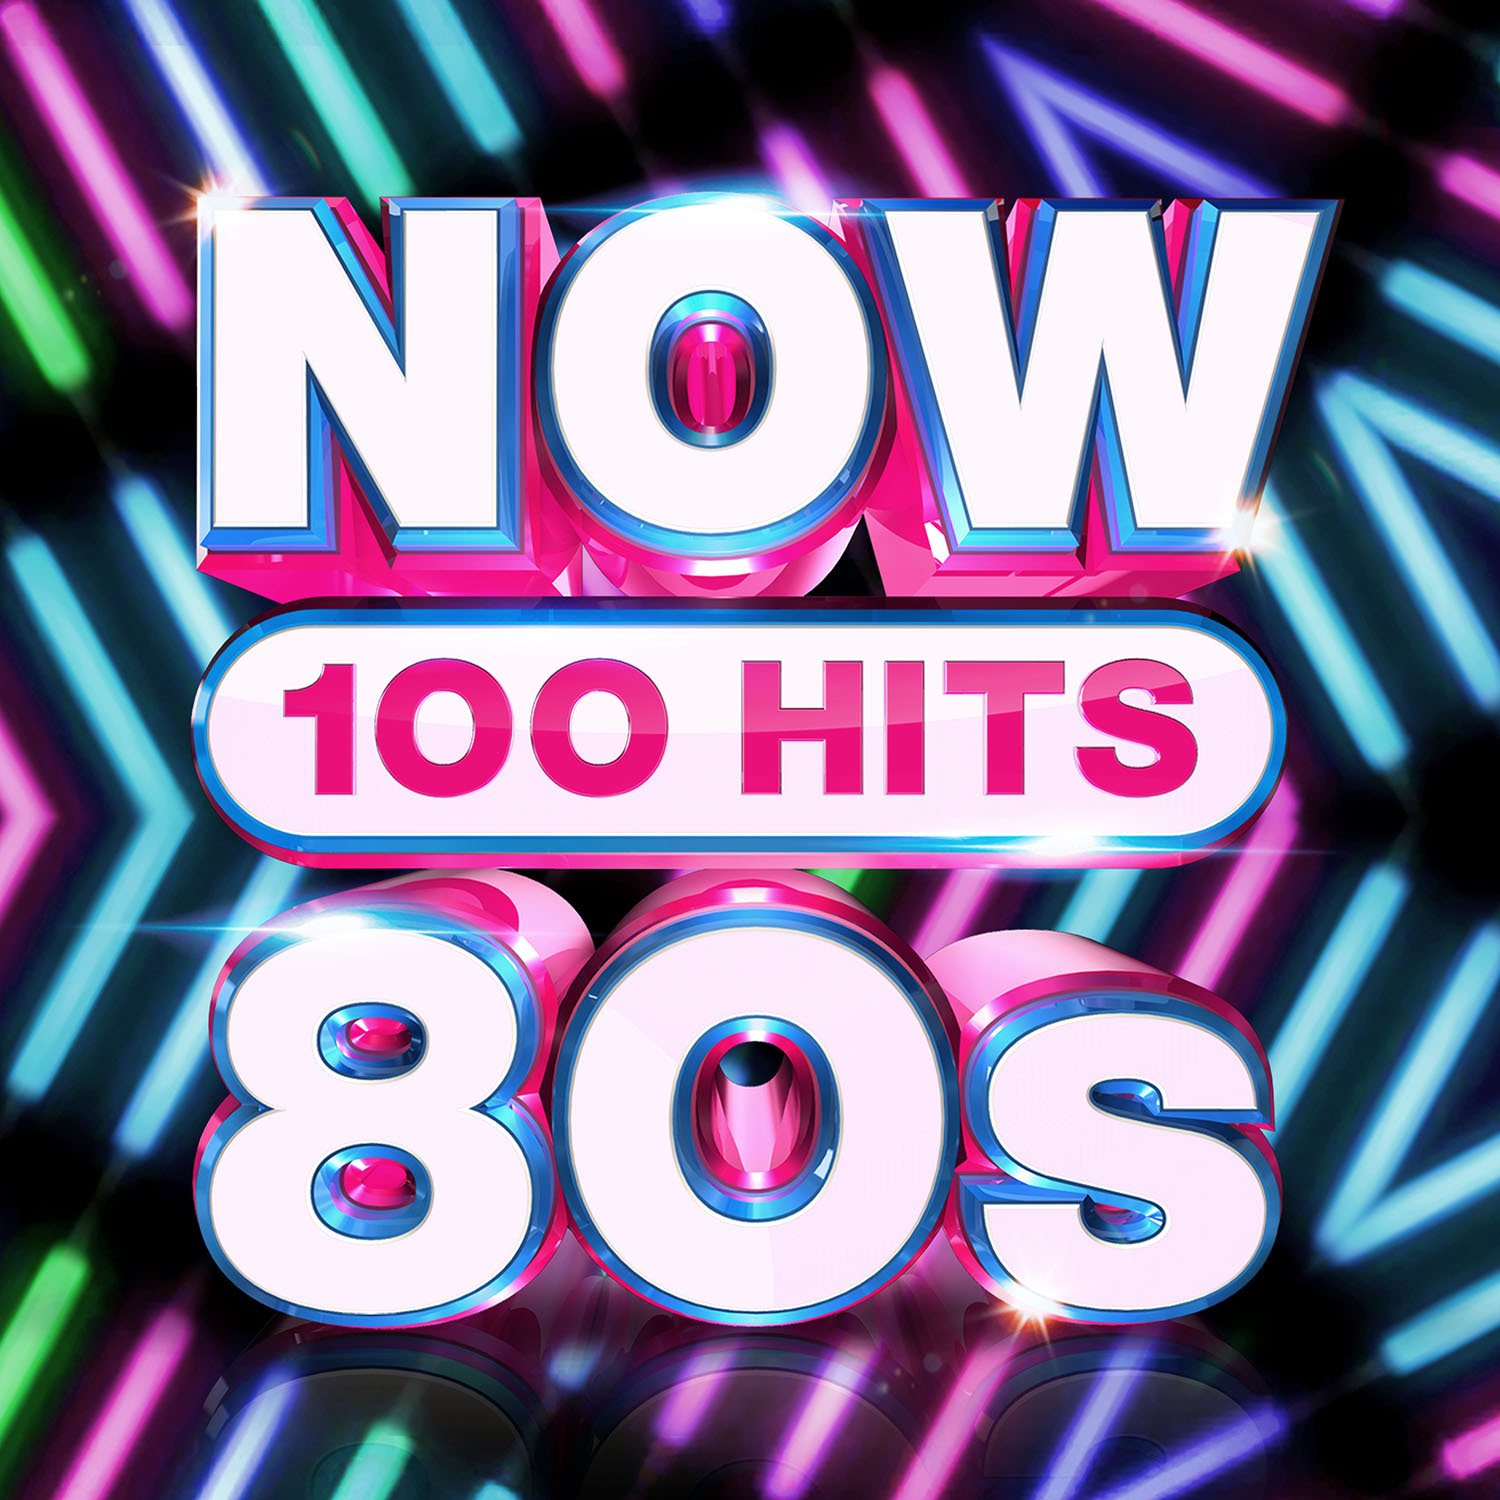 NOW 100 Hits 80s CD Review